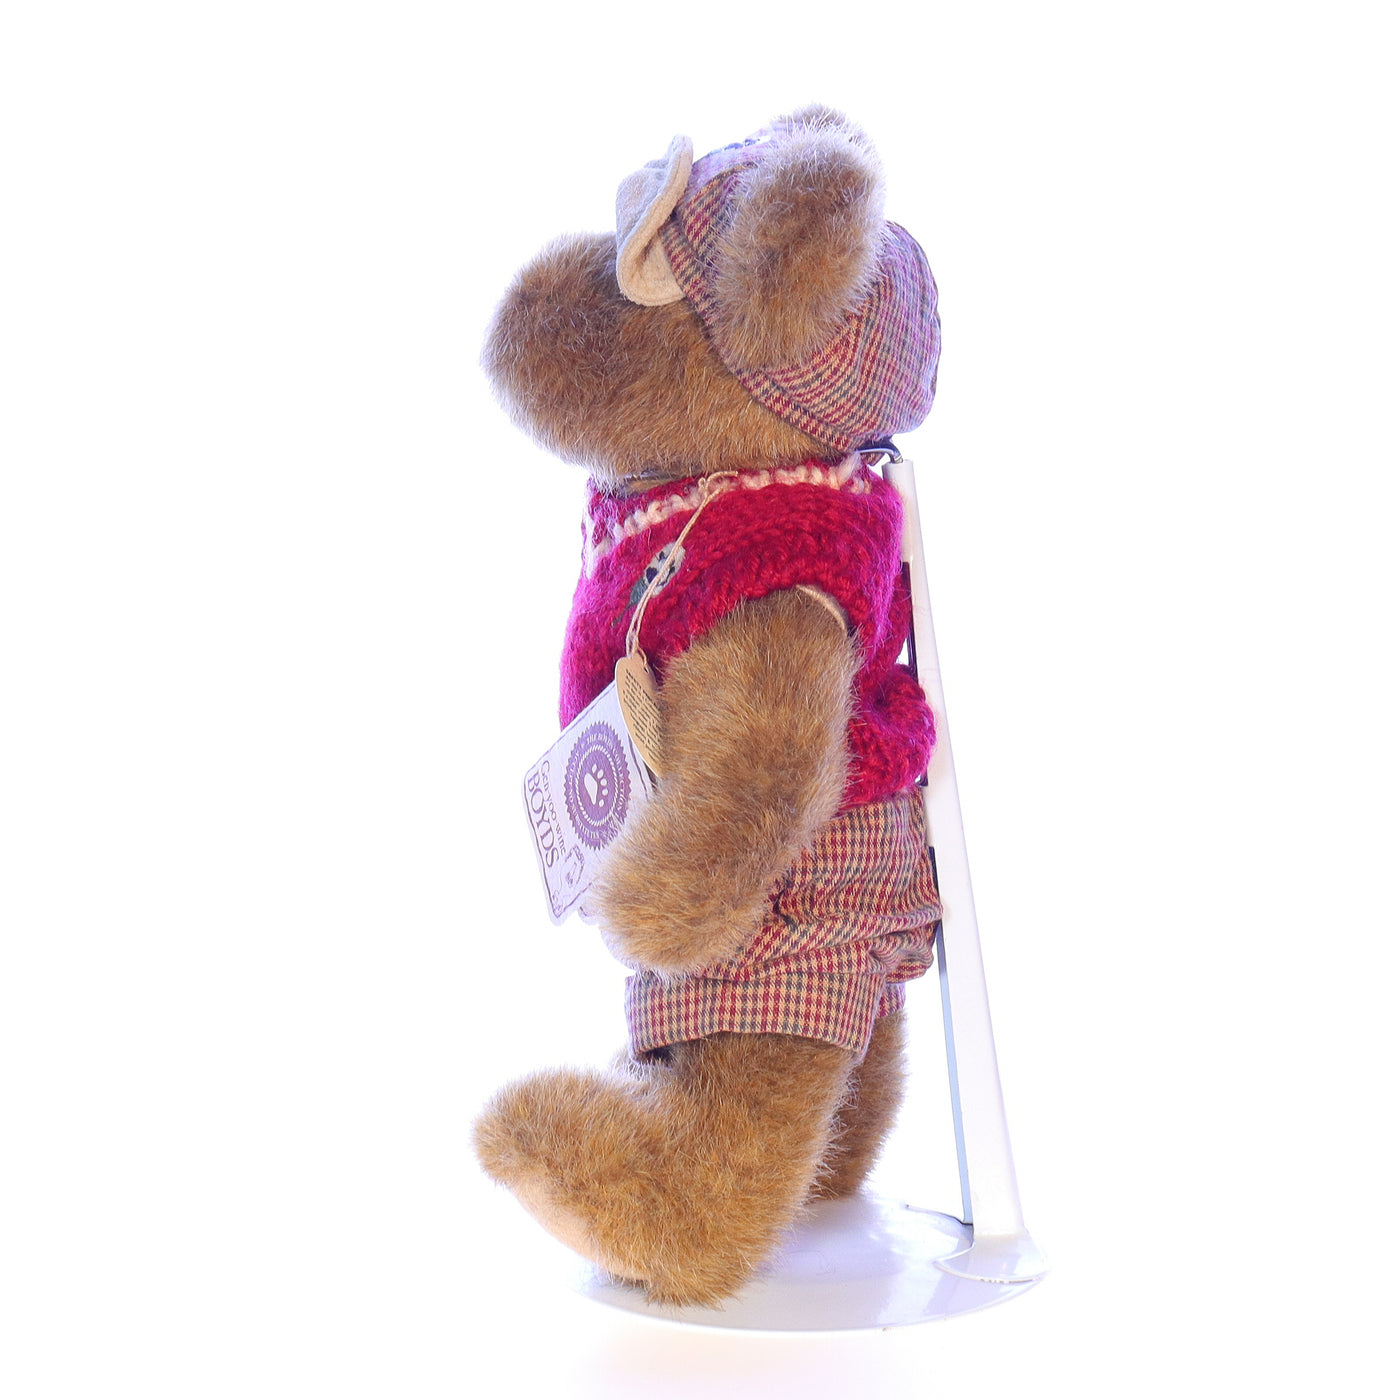 Boyds_Bears_and_Friends_918339_Putter_T_Parfore_TJs_Best_Dressed_Stuffed_Animal_1988 Left Side View